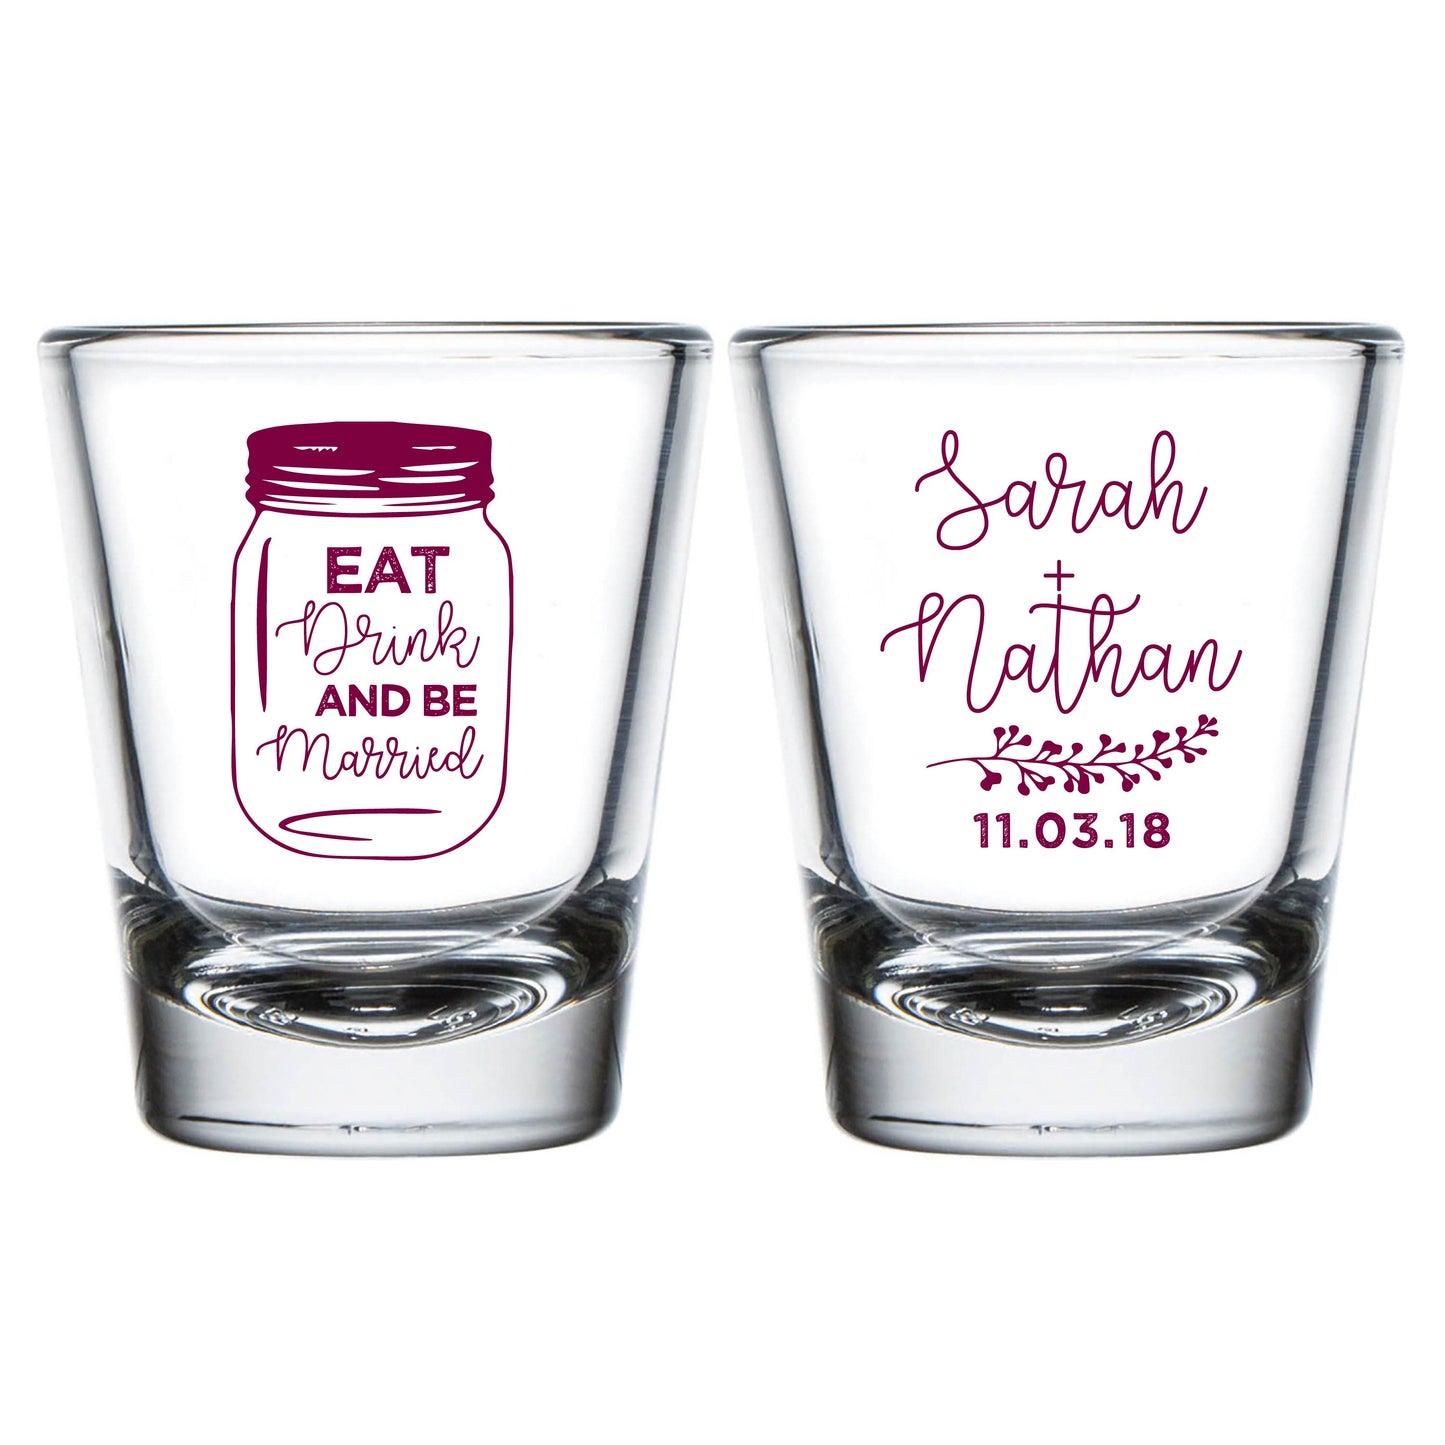 Eat Drink and Be Married Mason Jar Wedding Shot Glasses (24)